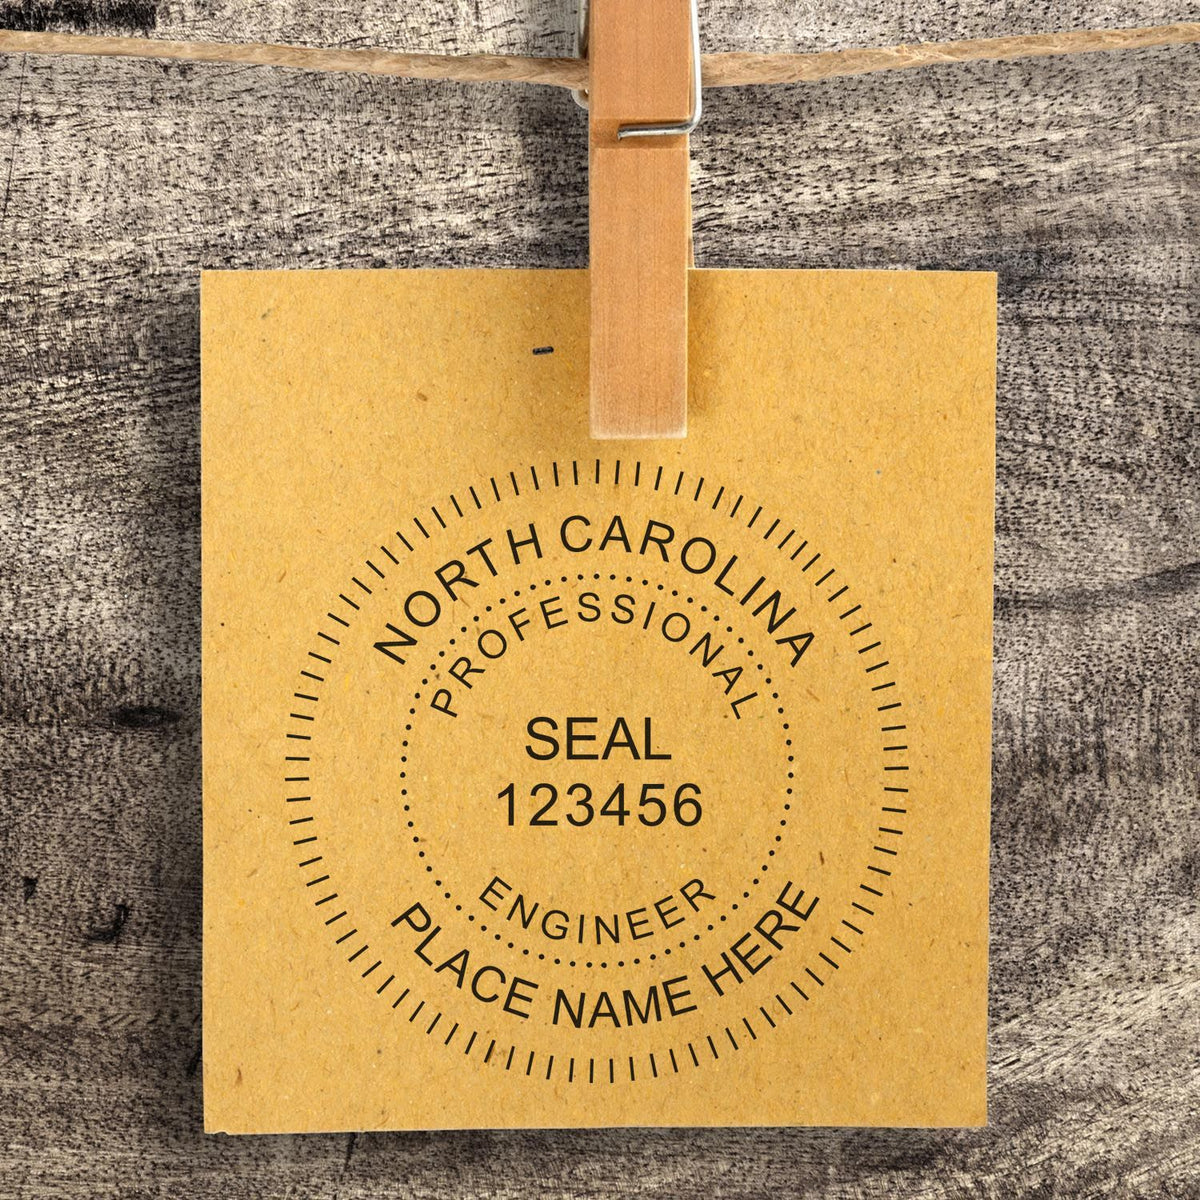 A lifestyle photo showing a stamped image of the North Carolina Professional Engineer Seal Stamp on a piece of paper